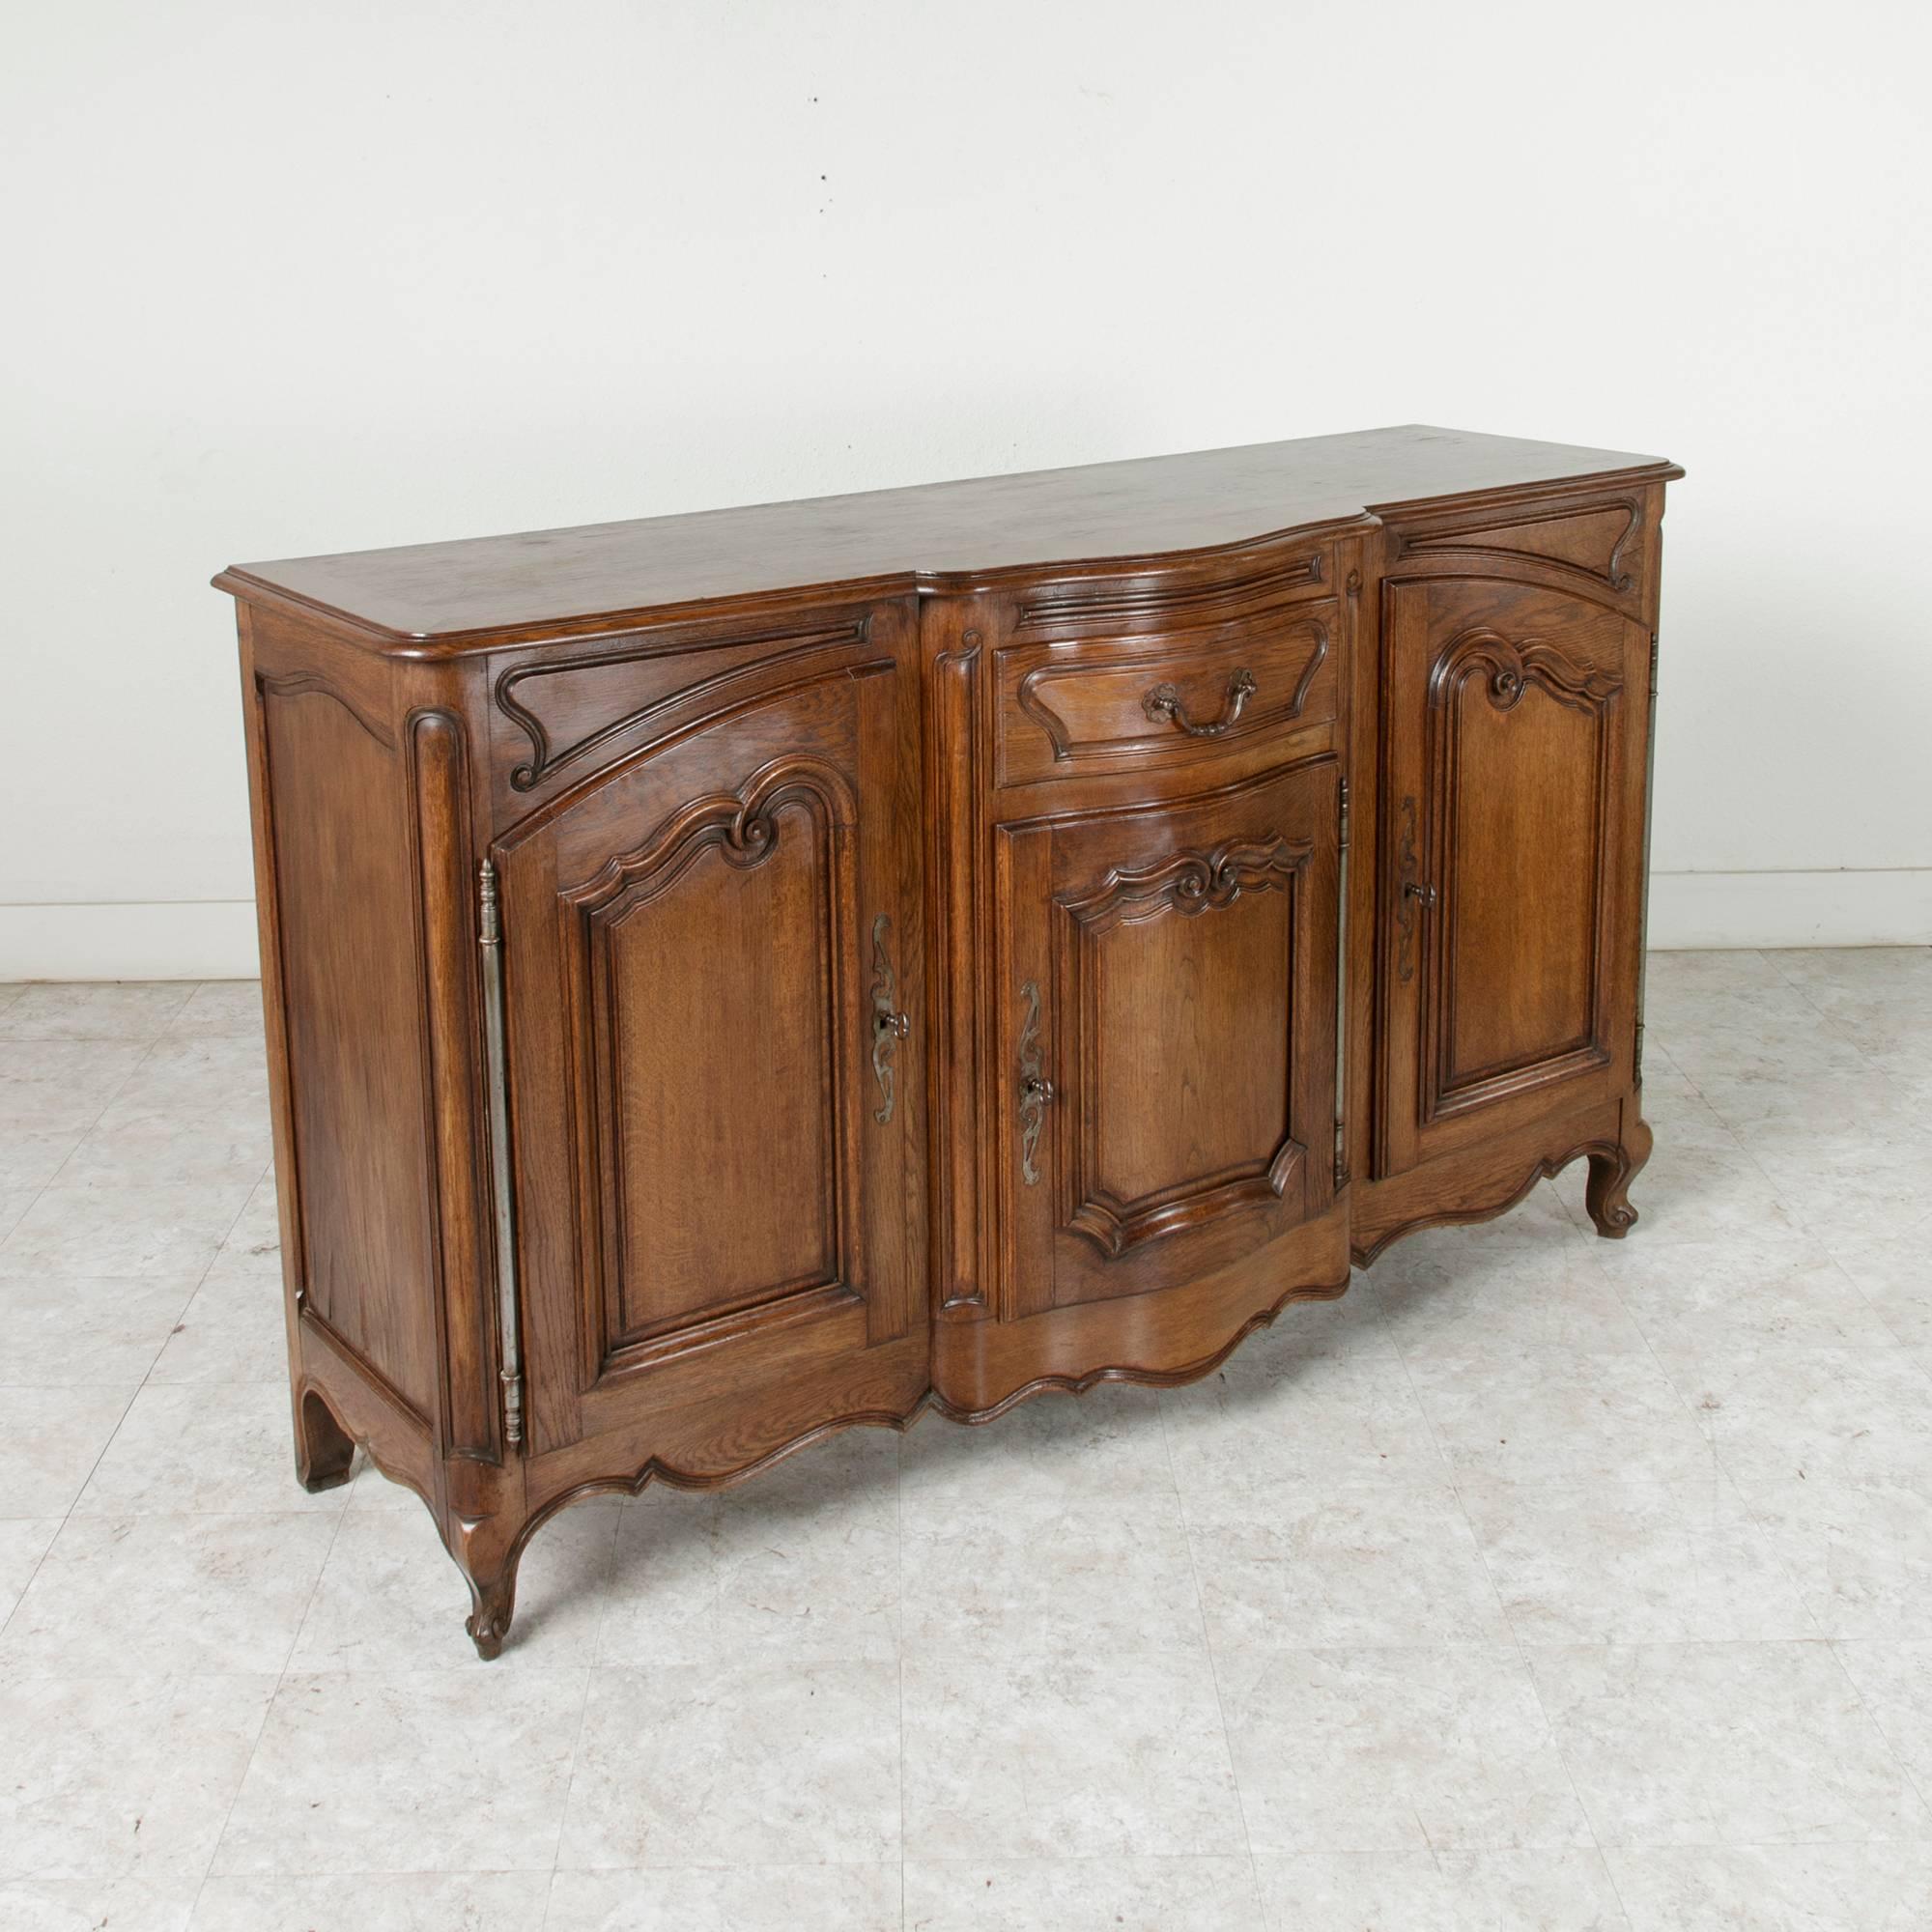 This hand-carved Louis XV style oak enfilade or sideboard from the early 20th century features a bow front and solid panel sides with a beveled top. Its bow front contains a single drawer of dovetail construction and a lower door and is flanked by